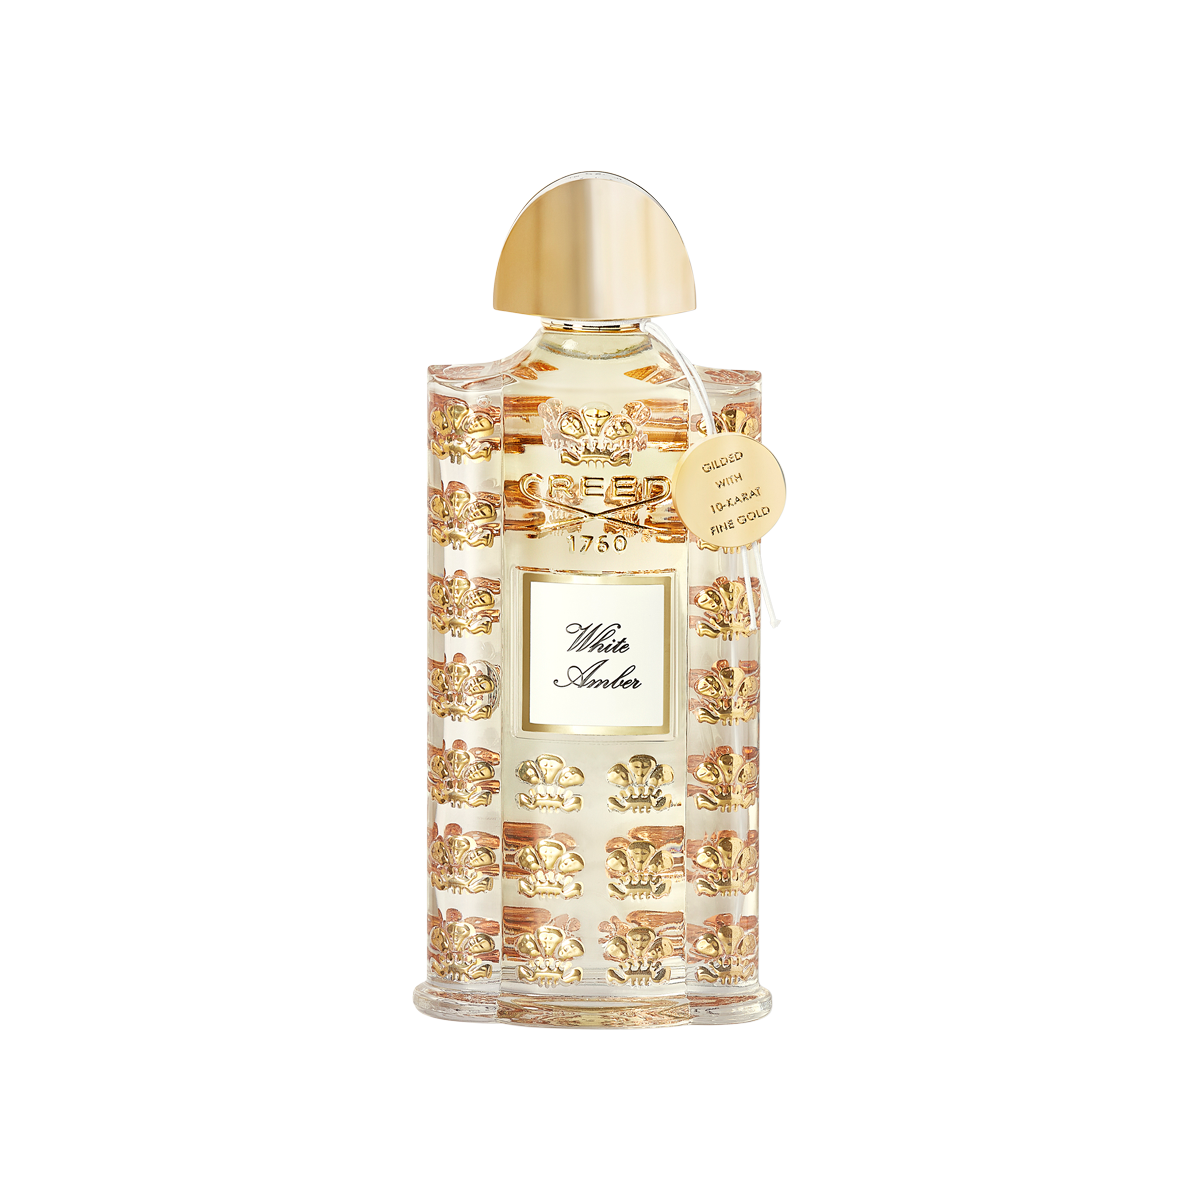 Creed - Royal Exclusives White Amber EDP